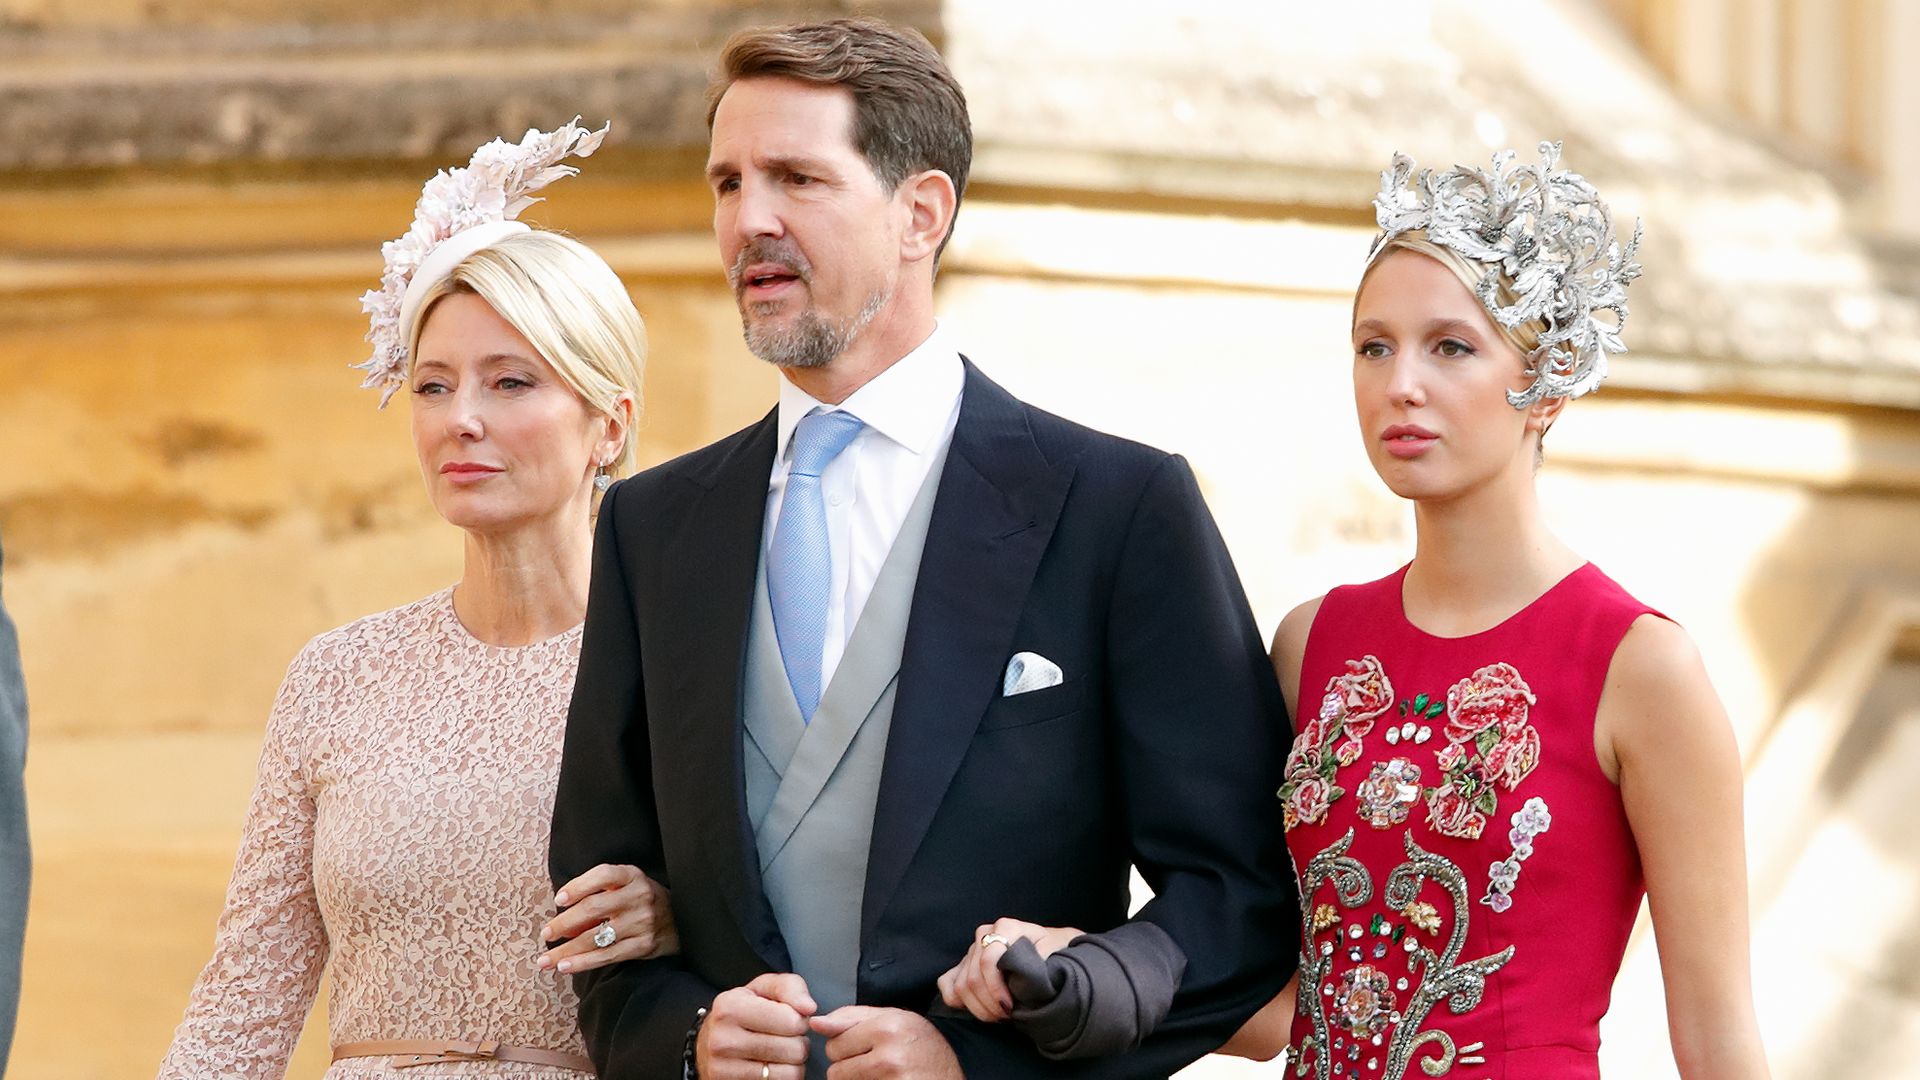 WINDSOR, UNITED KINGDOM - OCTOBER 12: (EMBARGOED FOR PUBLICATION IN UK NEWSPAPERS UNTIL 24 HOURS AFTER CREATE DATE AND TIME) Crown Princess Marie-Chantal of Greece, Crown Prince Pavlos of Greece and Princess Maria-Olympia of Greece attend the wedding of P